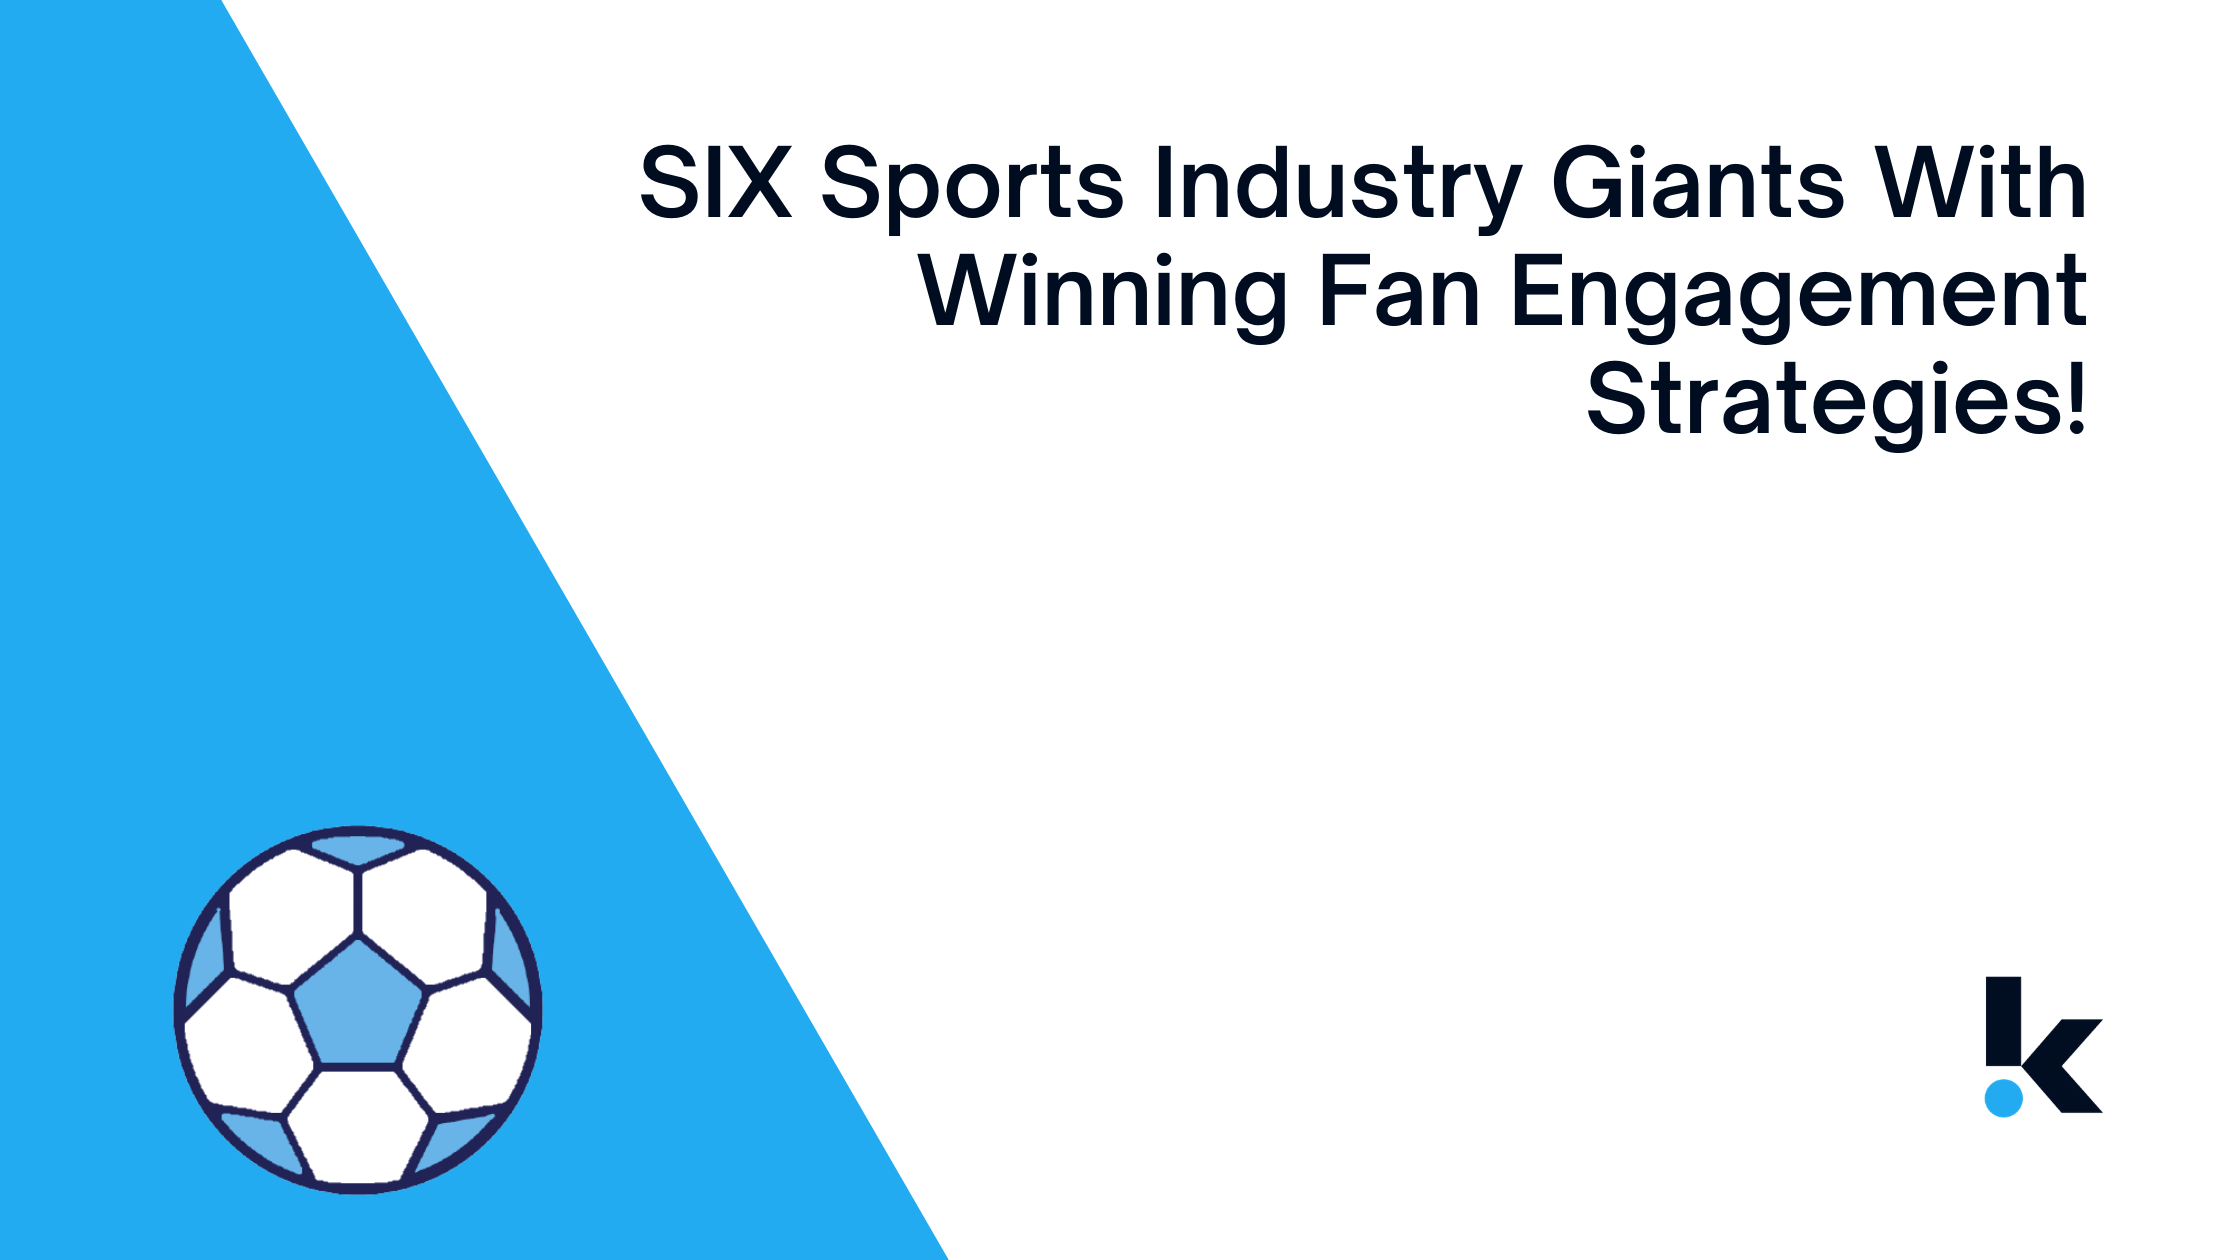 Komo Digital shares successful fan engagement strategies that were adopted by six sports industry giants in 2020. Be inspired by their creativity!